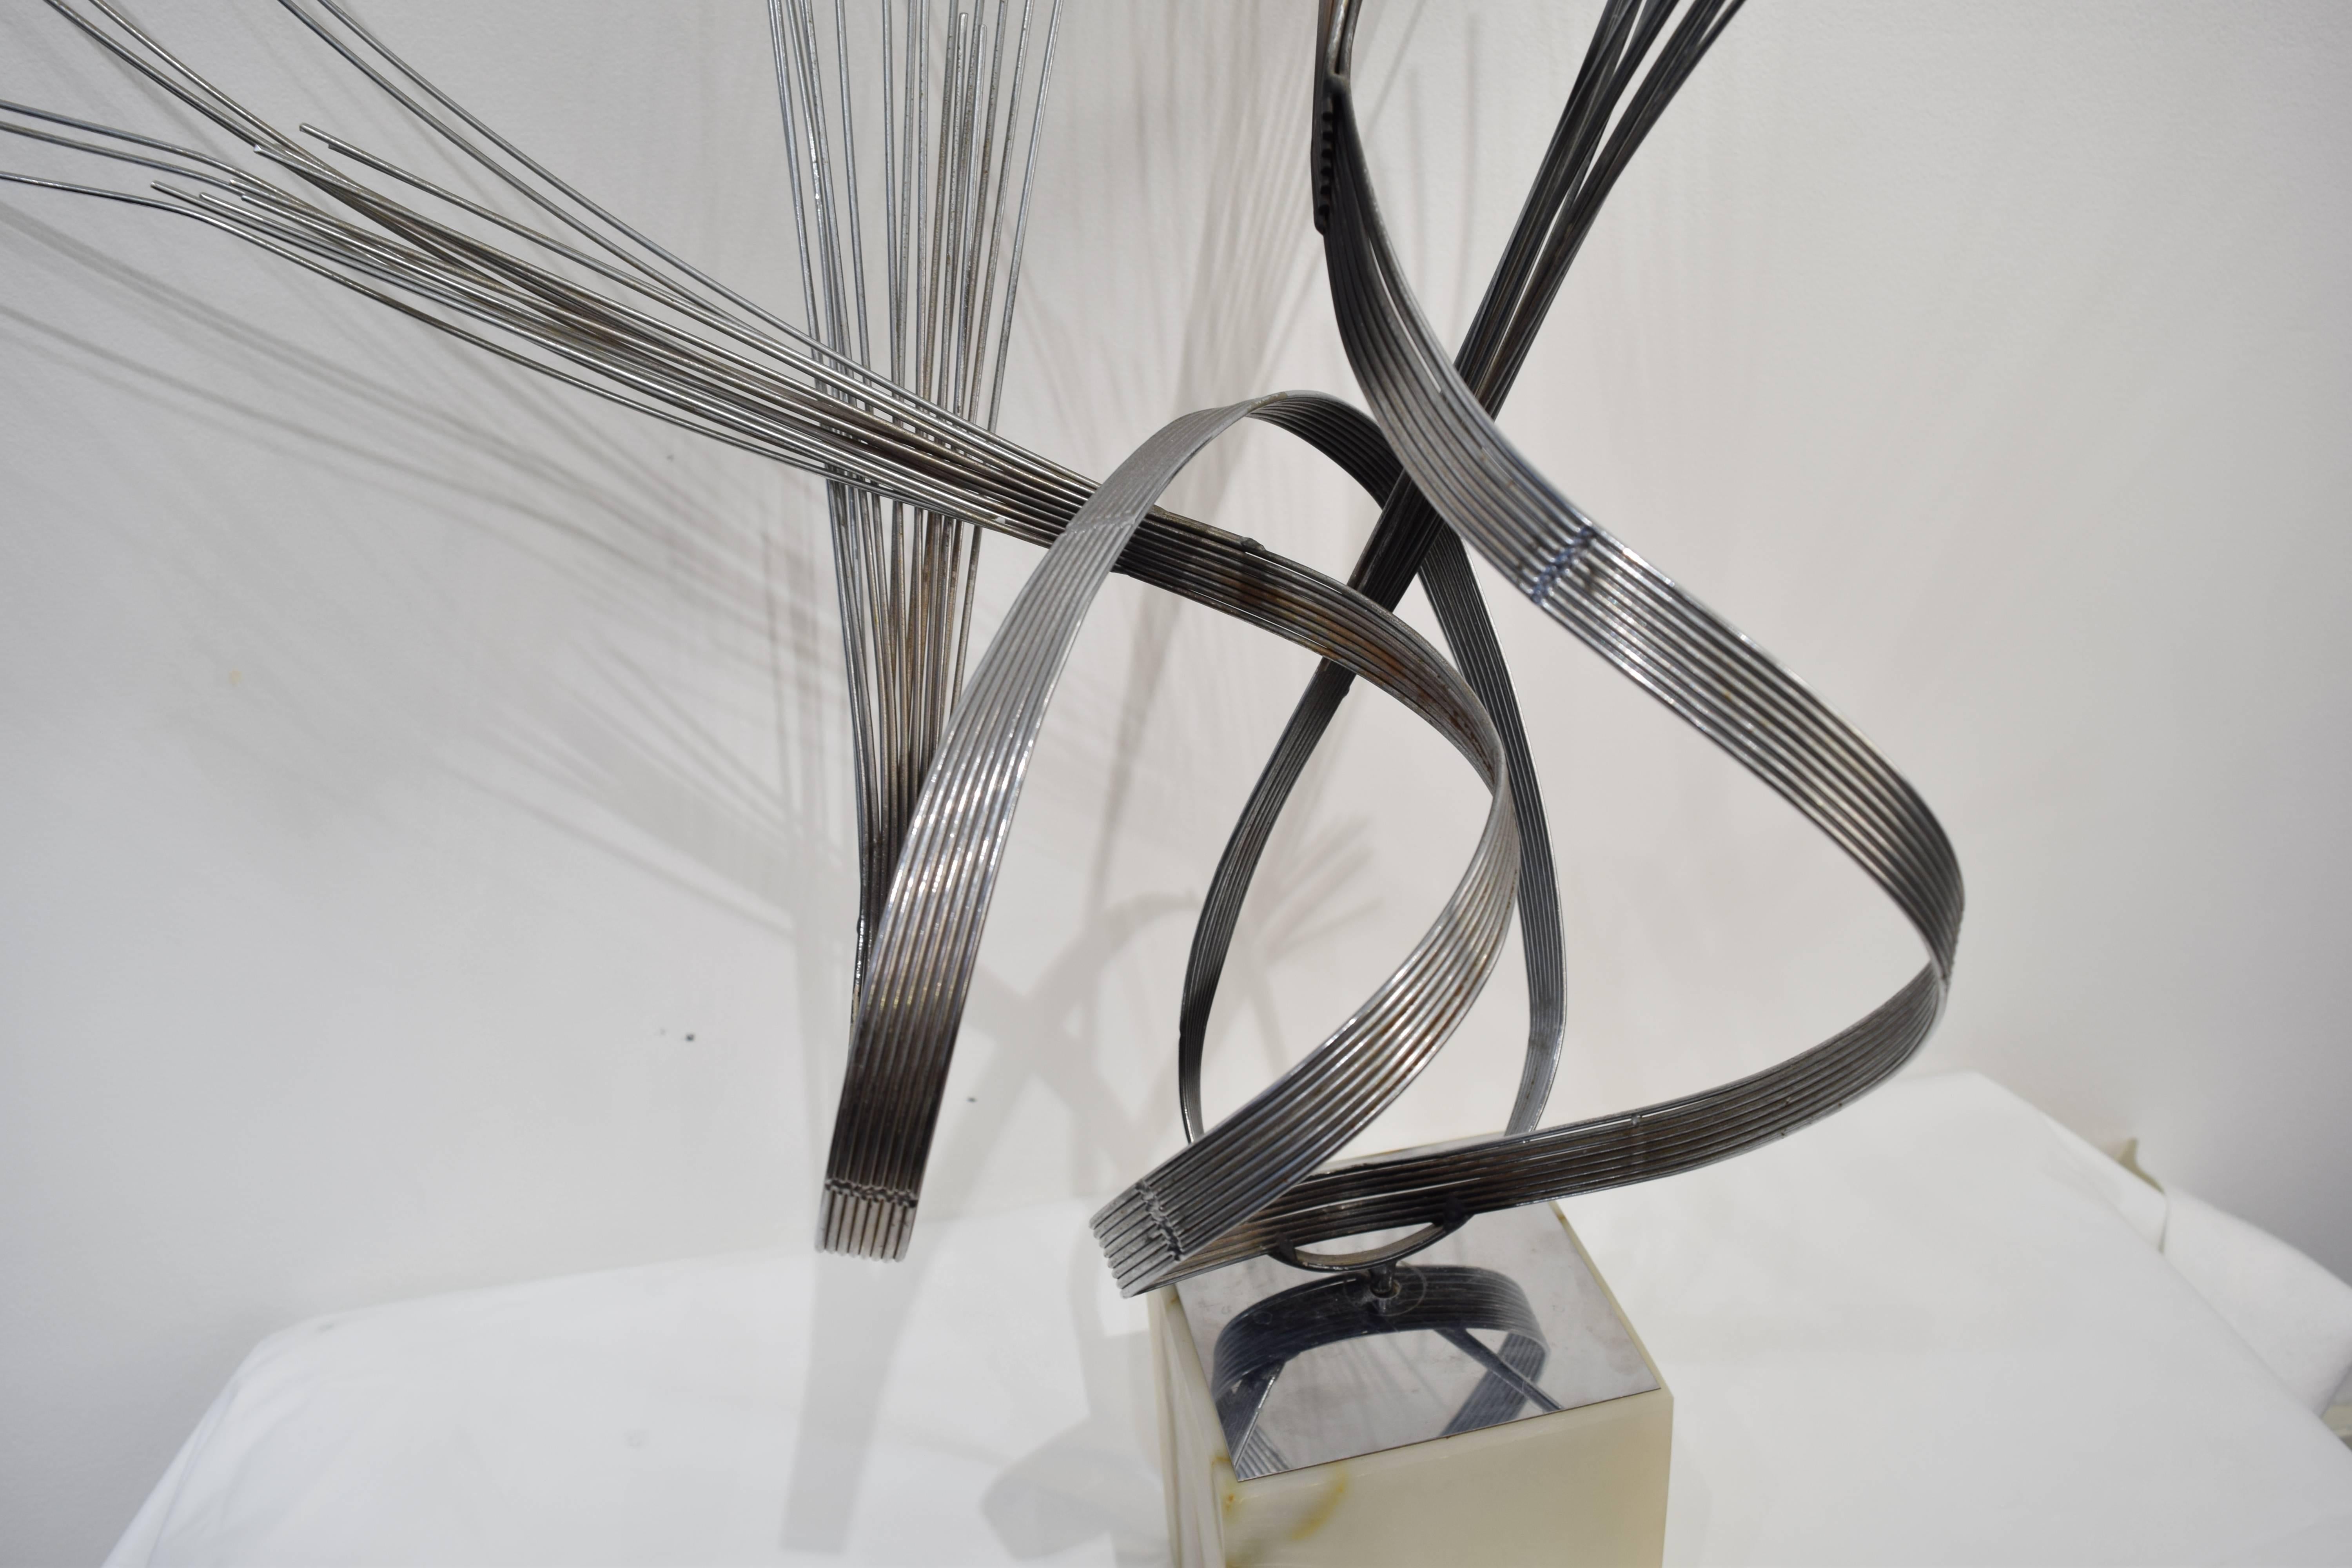 American Kinetic Curtis Jere Sculpture